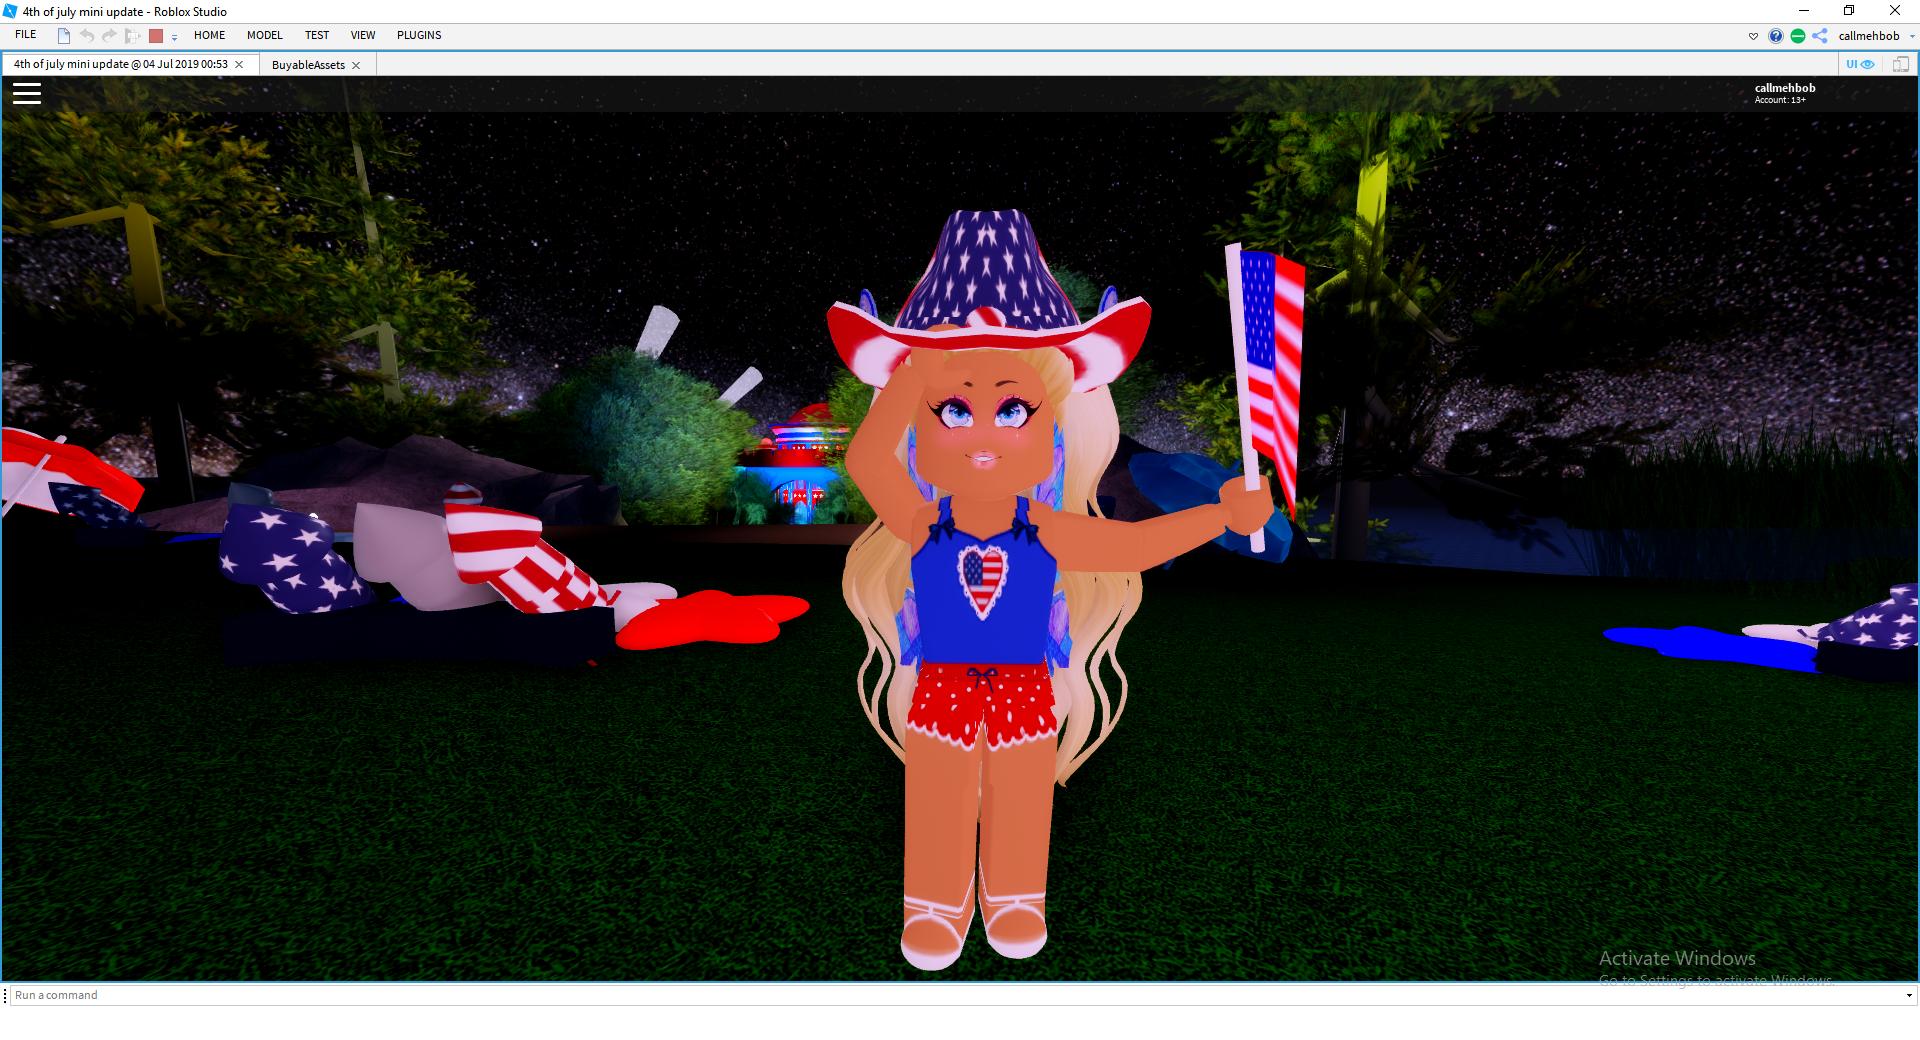 Barbie On Twitter Me Ok Guys We R Just Going To Do A Very Small Nice Patriotic Update Cuz It S Only For One Day And We Dont Wanna Take Too Much Time - barbie nightbarbie twitter roblox pictures roblox animation cute profile pictures